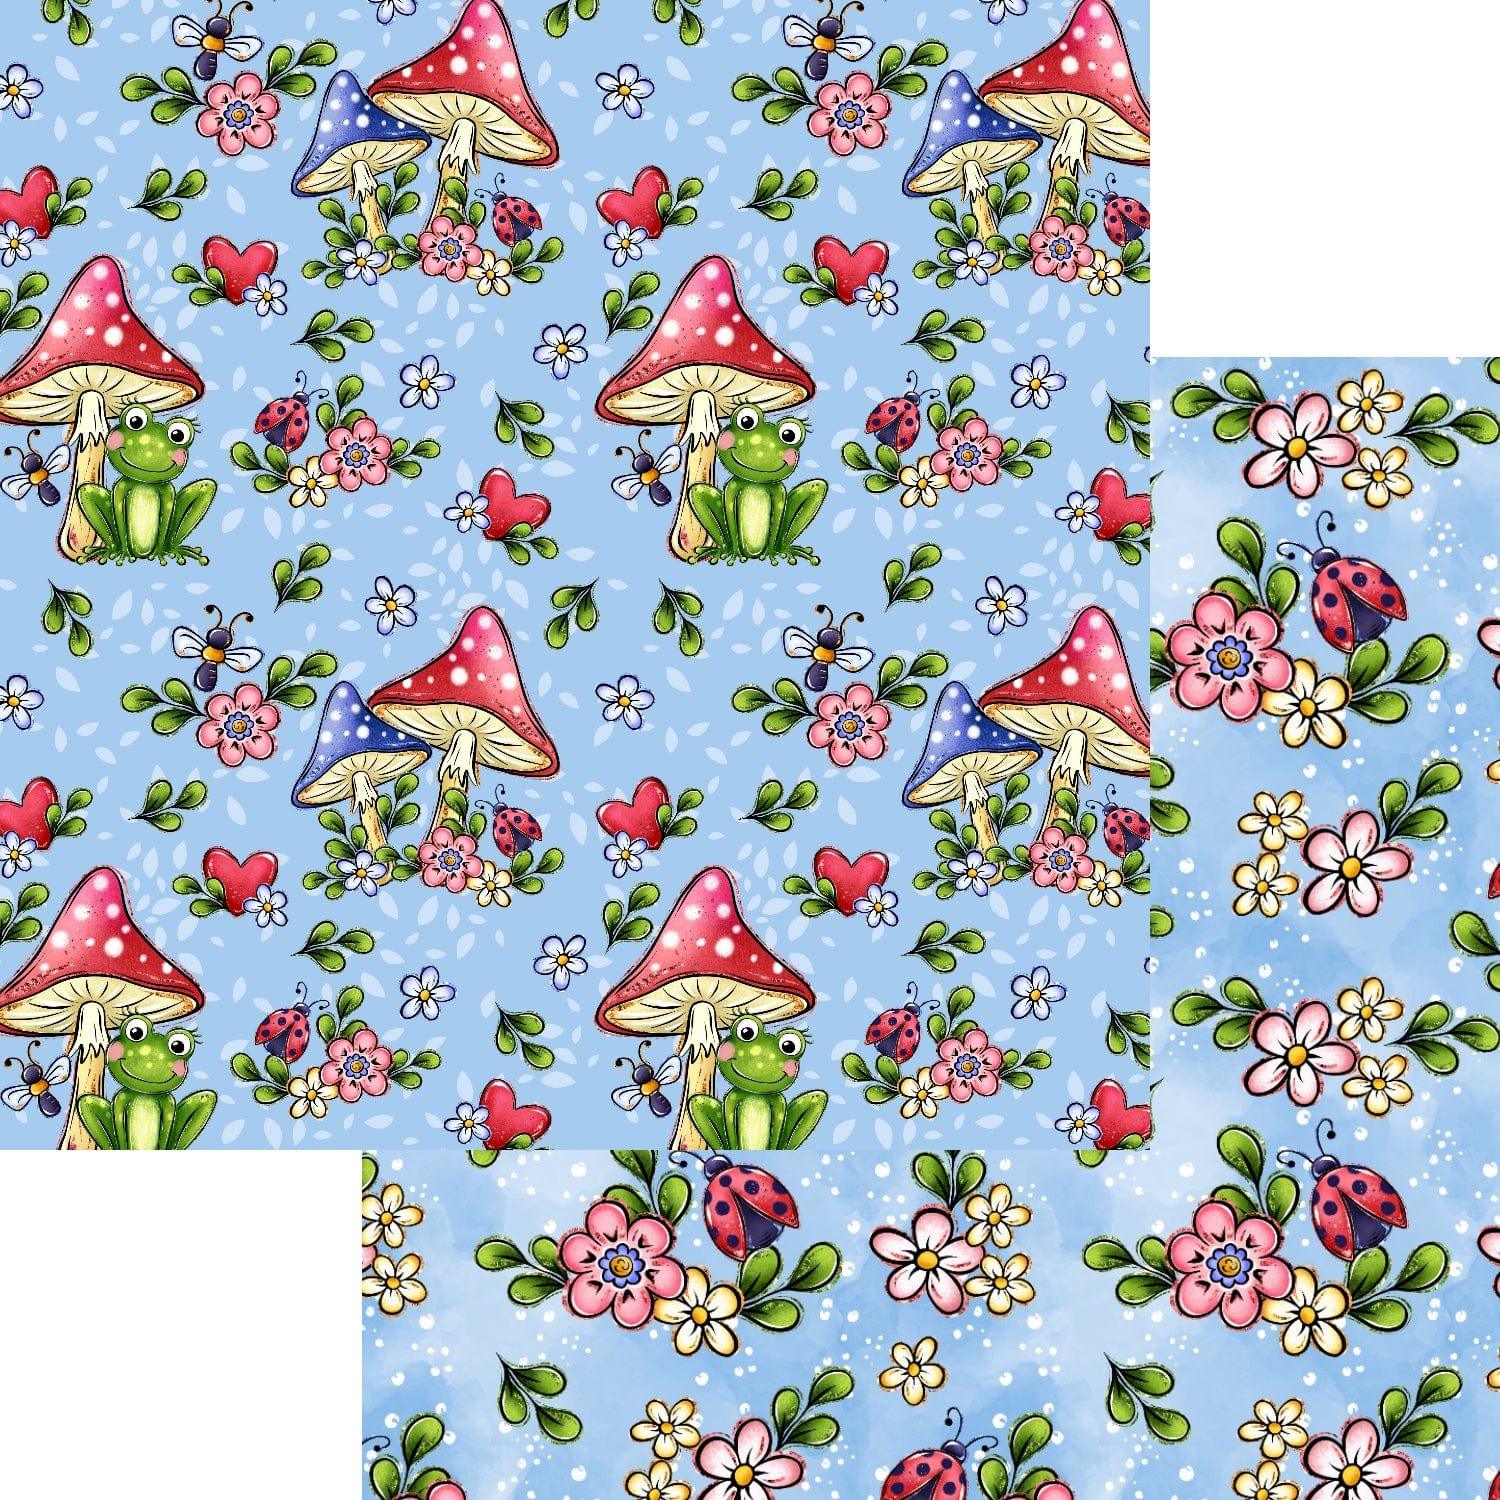  Frogs In The Morass Collection Mushroom Fields 12 x 12 Double-Sided Scrapbook Paper by SSC Designs - Scrapbook Supply Companies